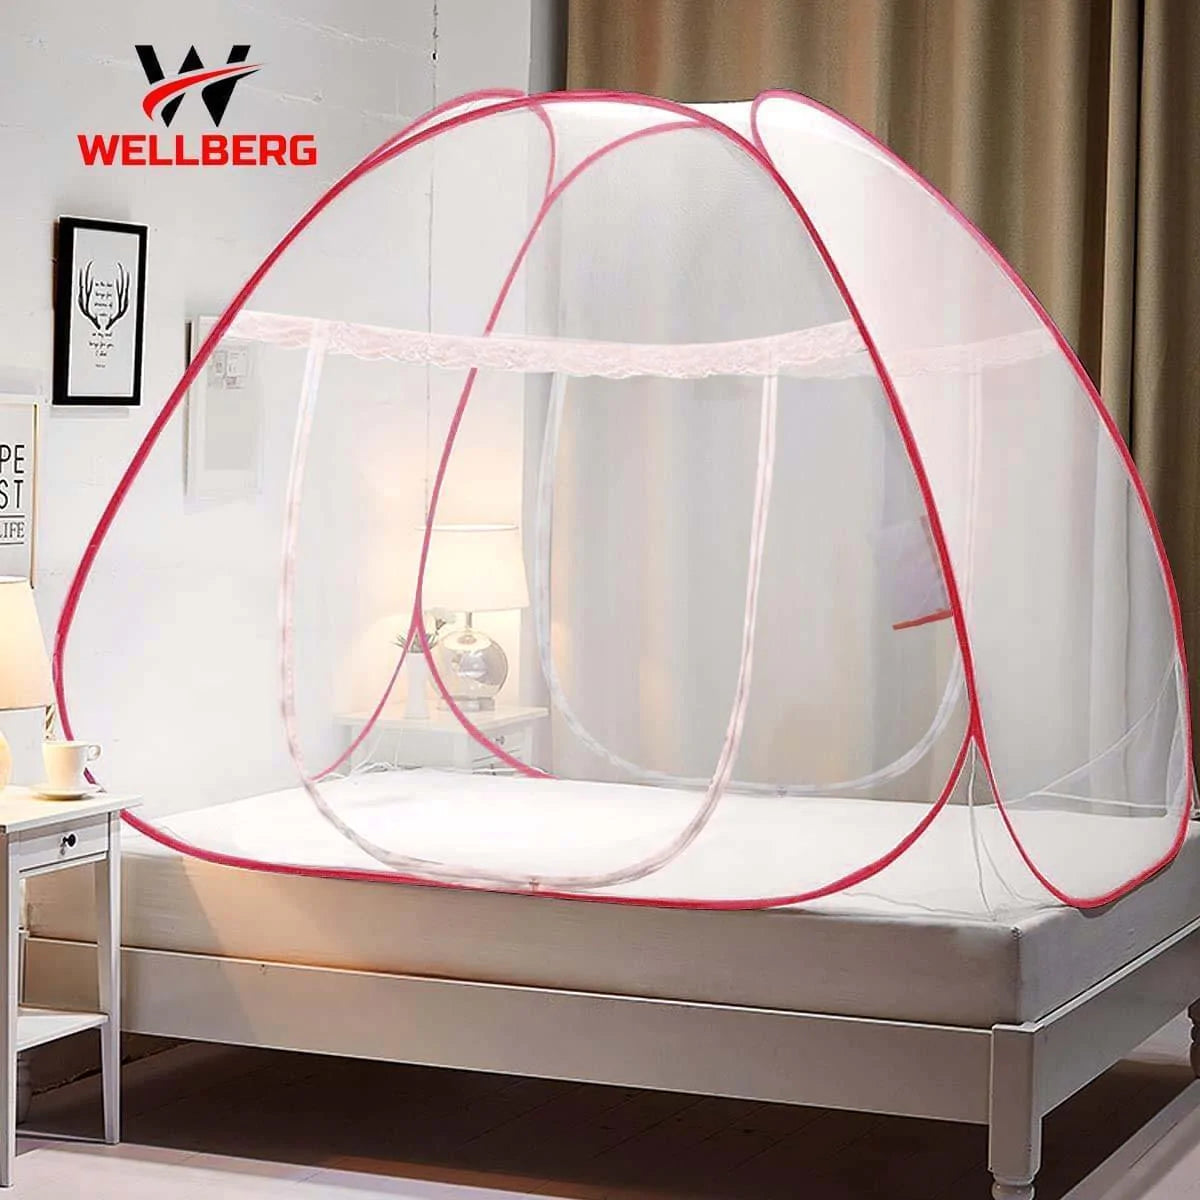 Wellberg Mosquito Net, Double Bed (King Size, 24-30 GSM, Foldable, Highly Durable) - Red - WELLBERG